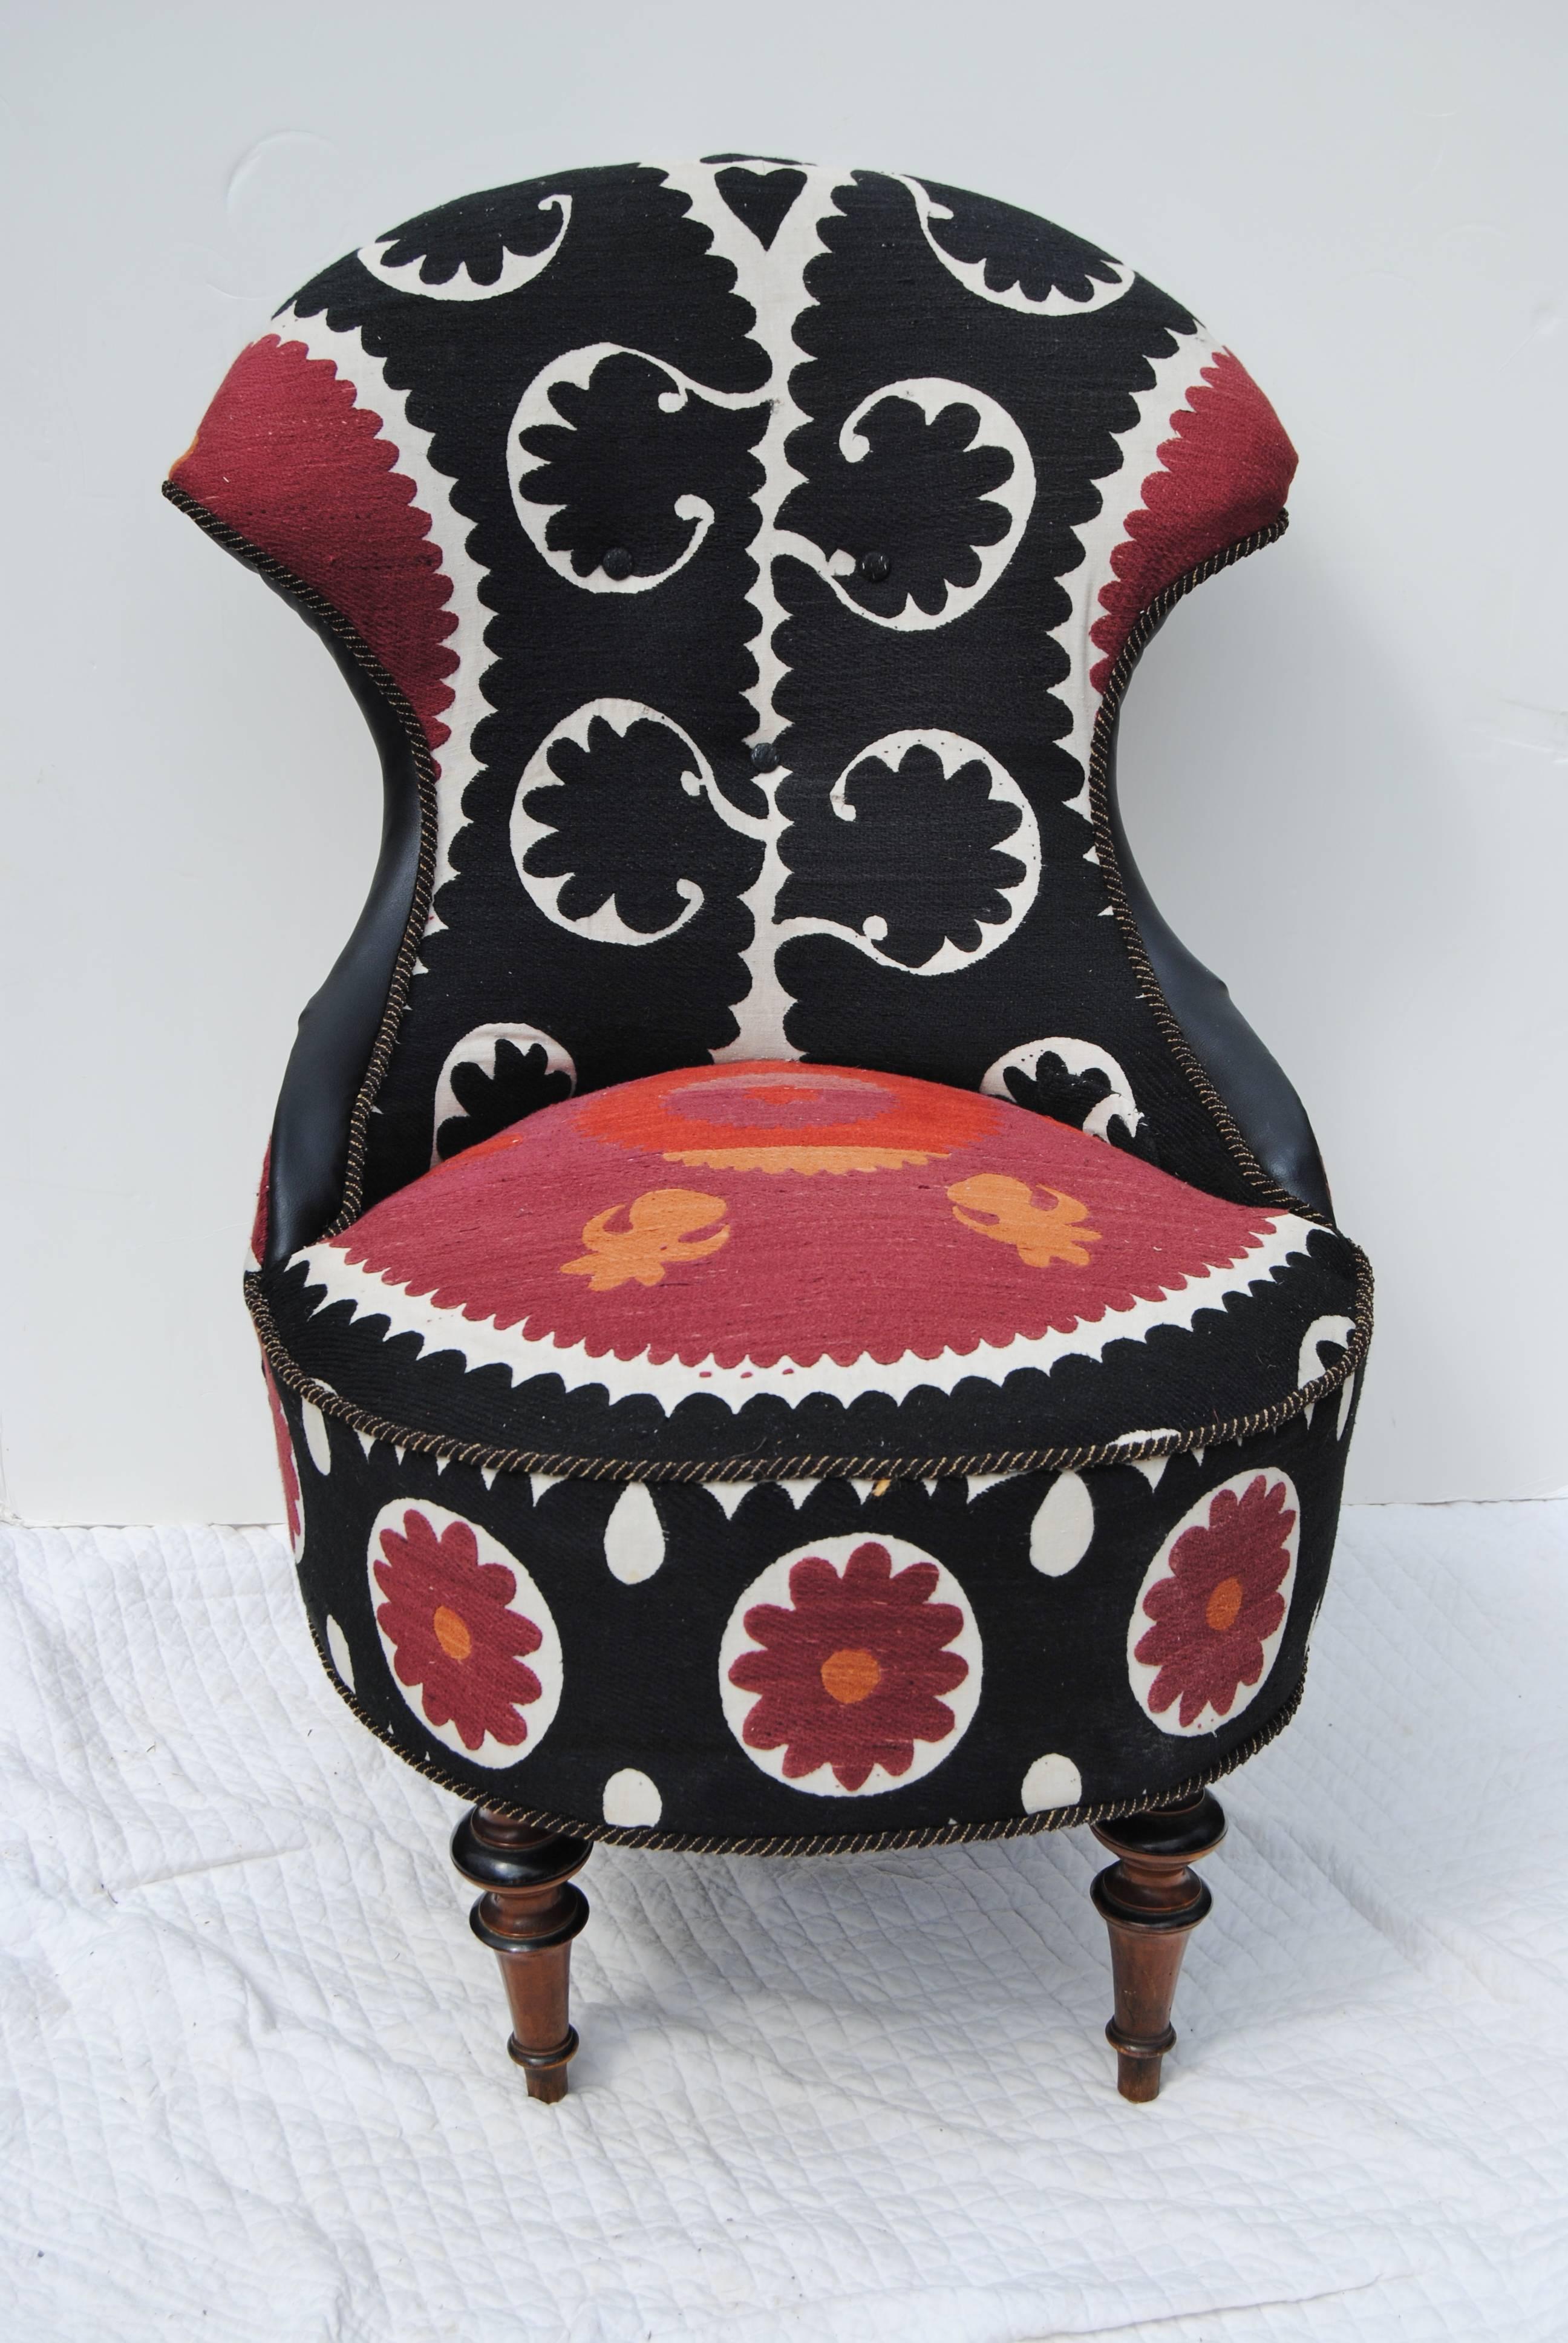 Cotton Antique European Chair Newly Upholsterd in a Vintage Suzani Textile